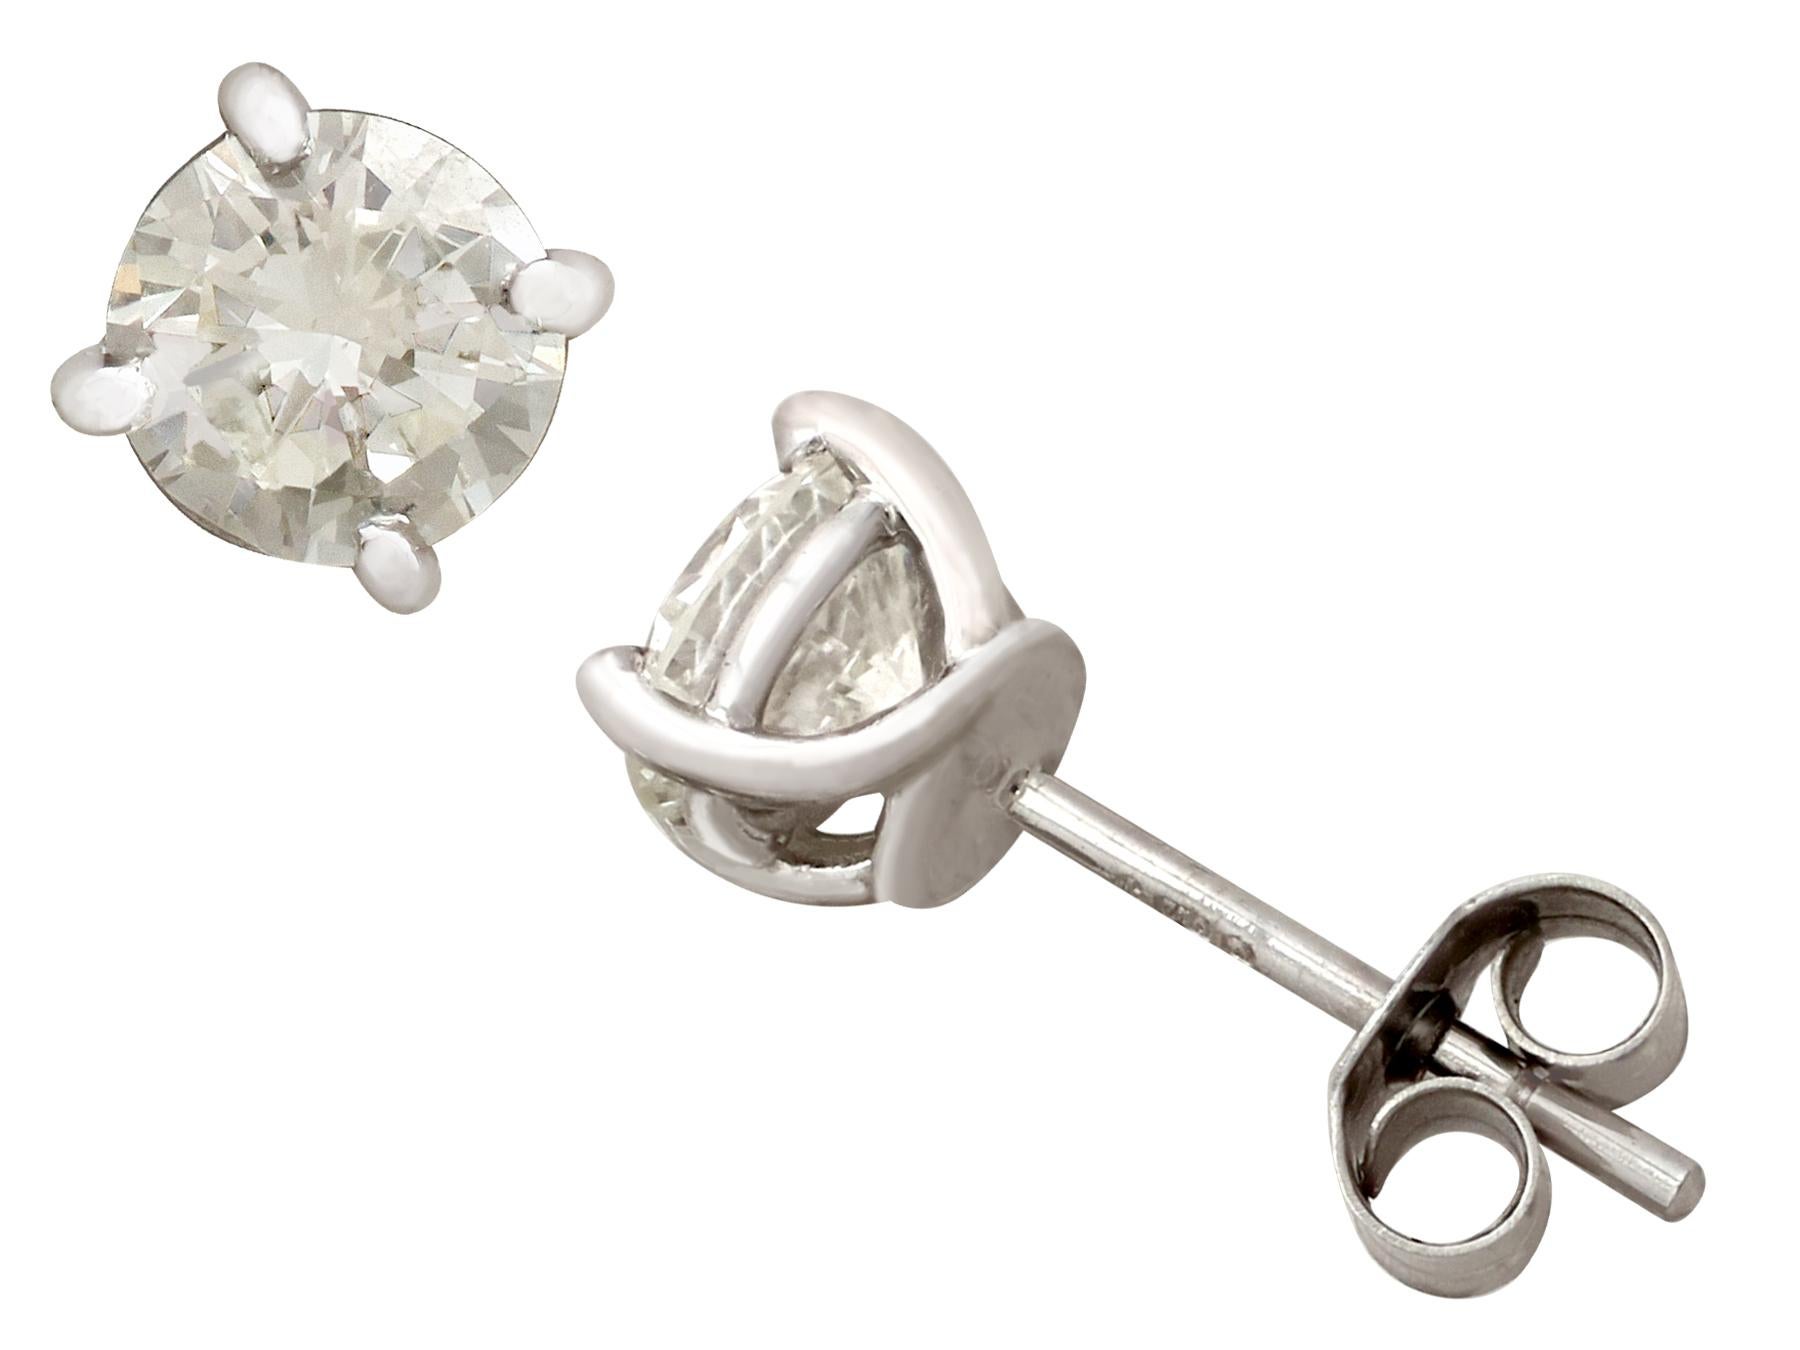 An impressive pair of contemporary 1.60 carat diamond (total) and 18 carat white gold stud earrings; part of our diverse antique jewellery and estate jewelry collections.

These fine and impressive diamond earrings have been crafted in 18ct white